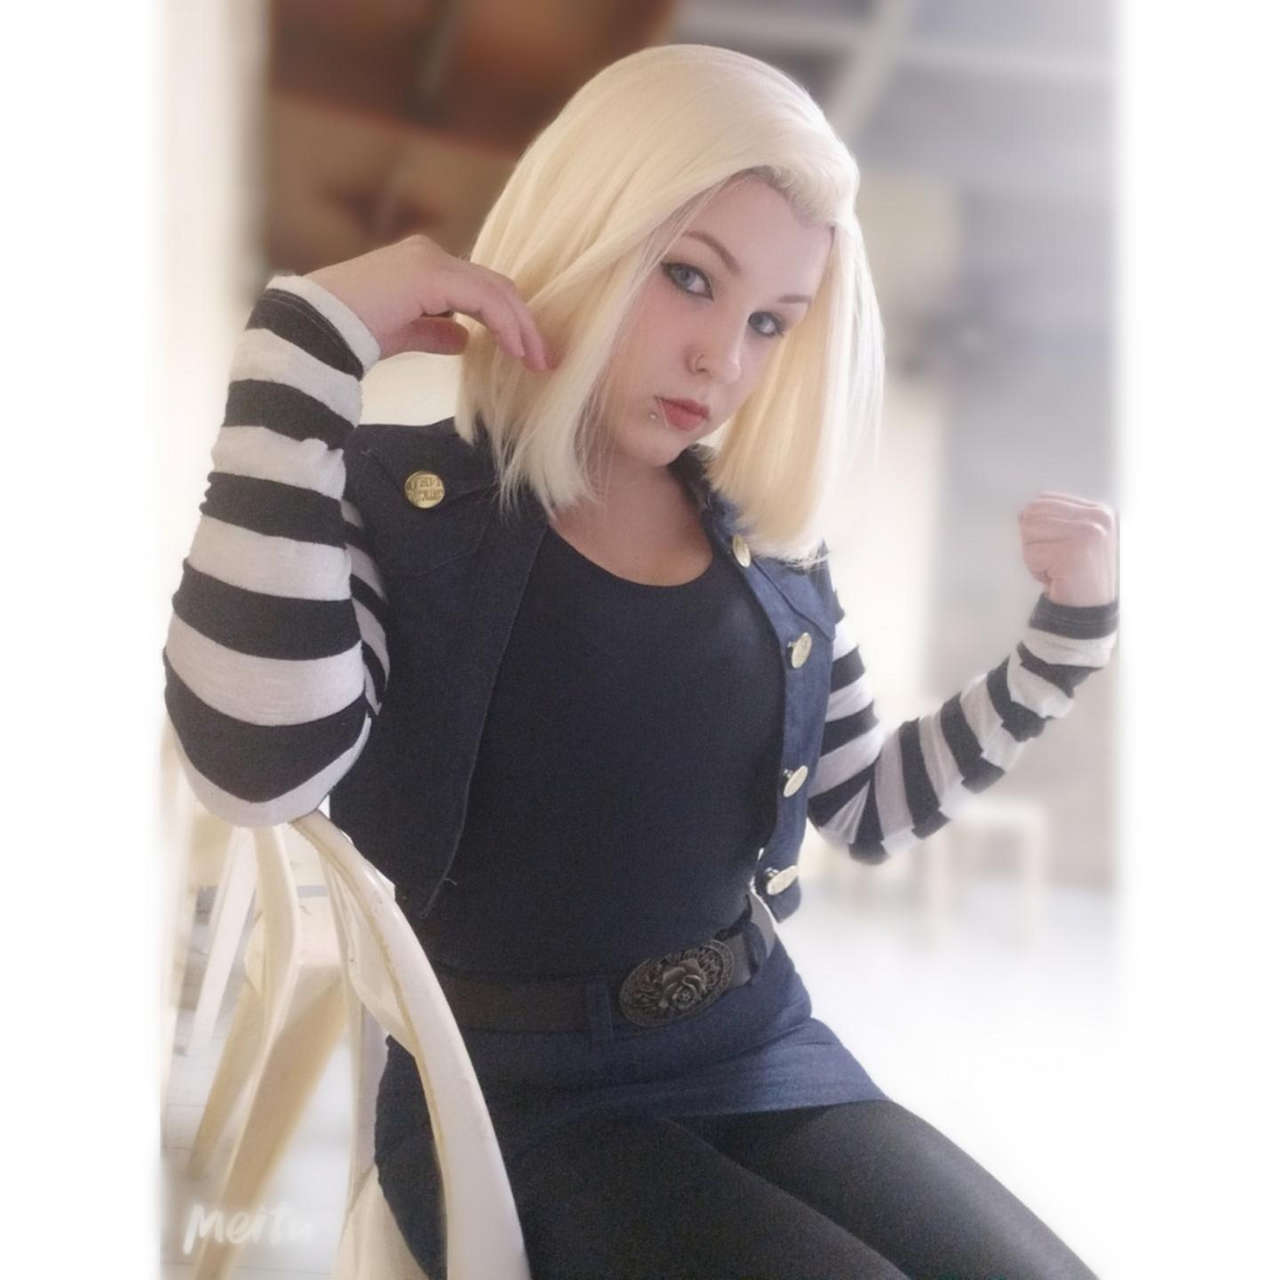 Self Android 18 By Azumicospla